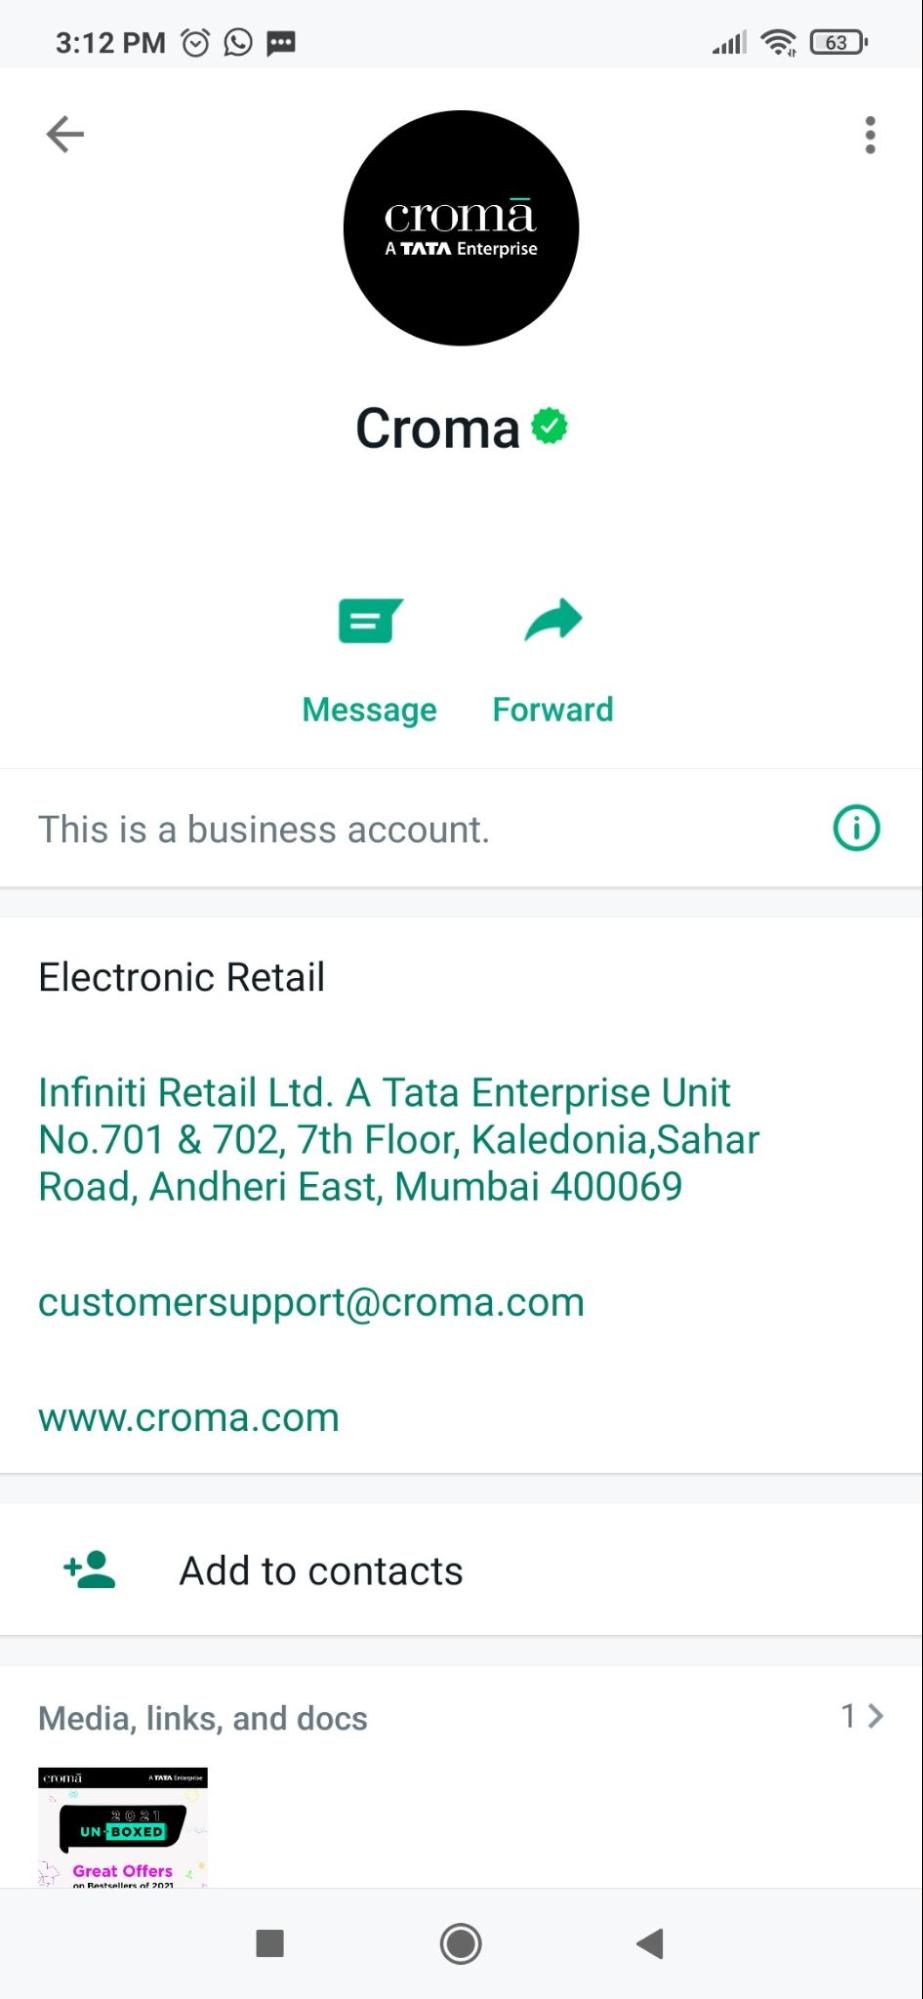 A picture showing how the business profile in WhatsApp Business app looks like